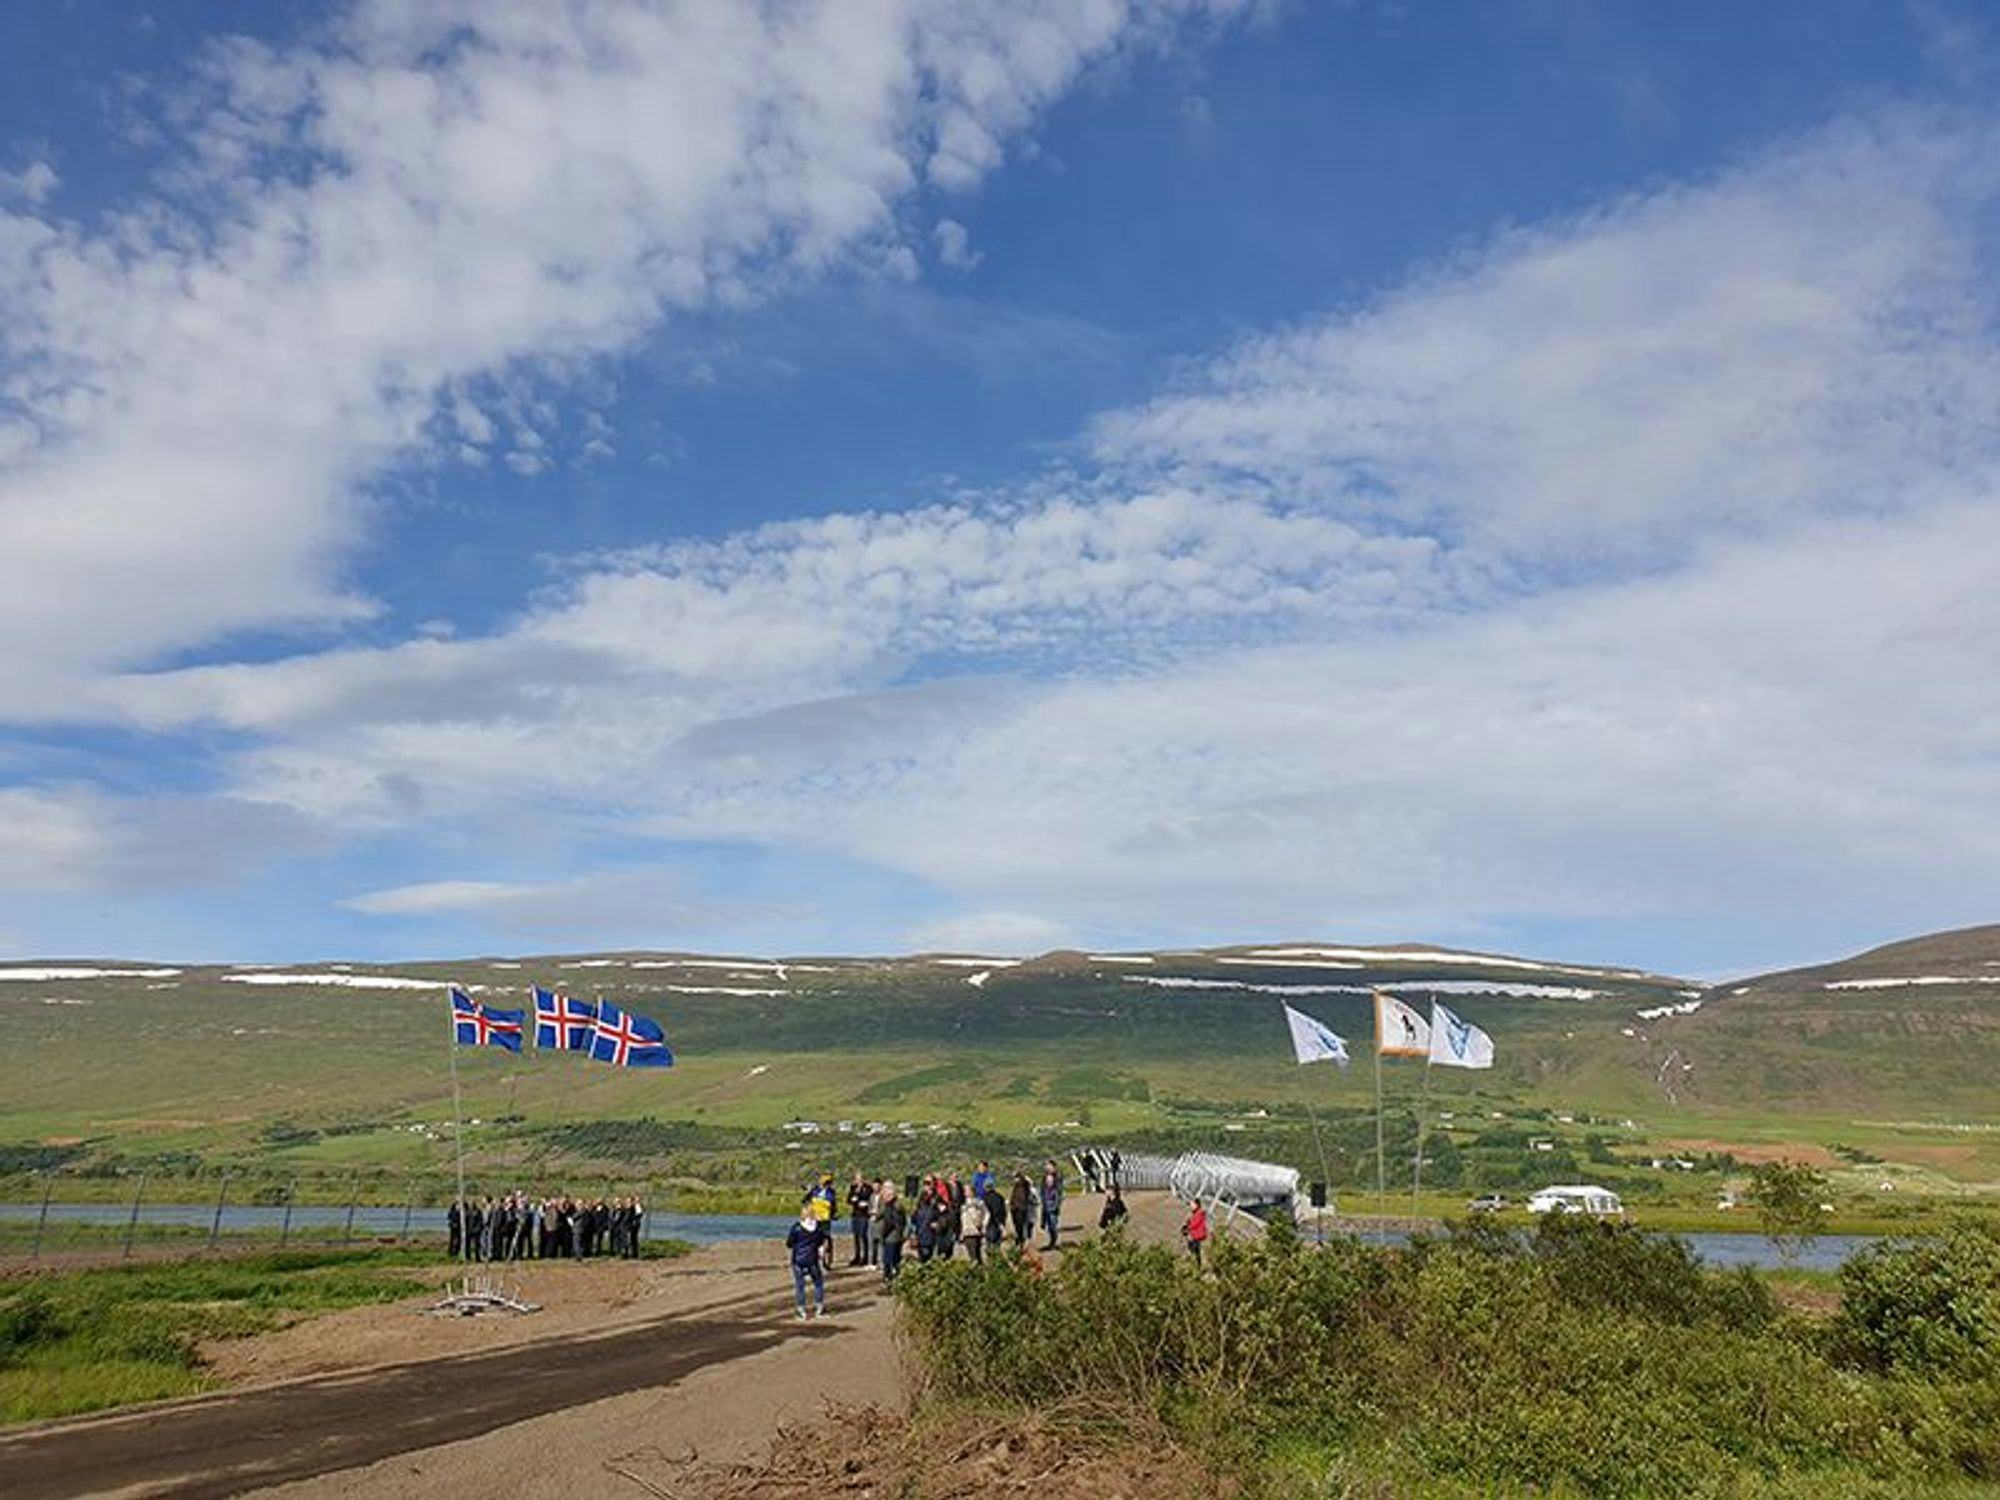 A group of people carrying flags, gathered in a scenic landscape